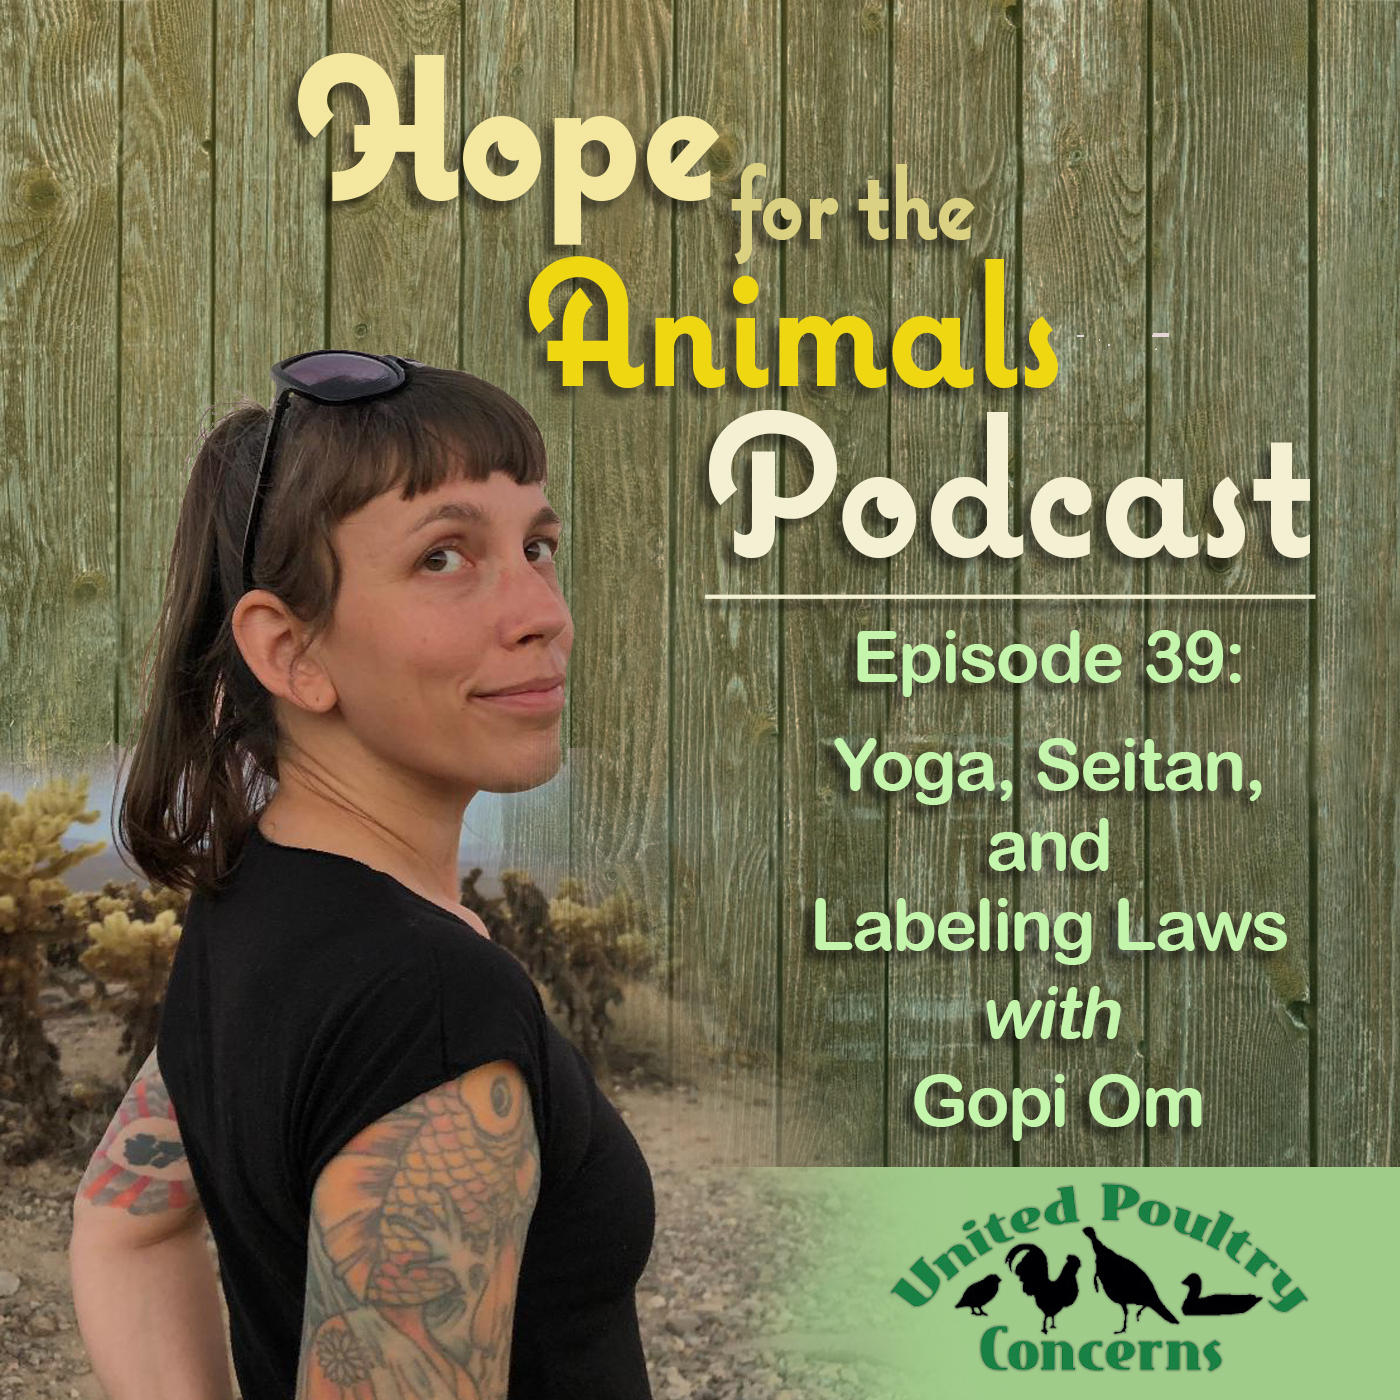 Episode 39: Yoga, Seitan, and Labeling Laws with Gopi Om